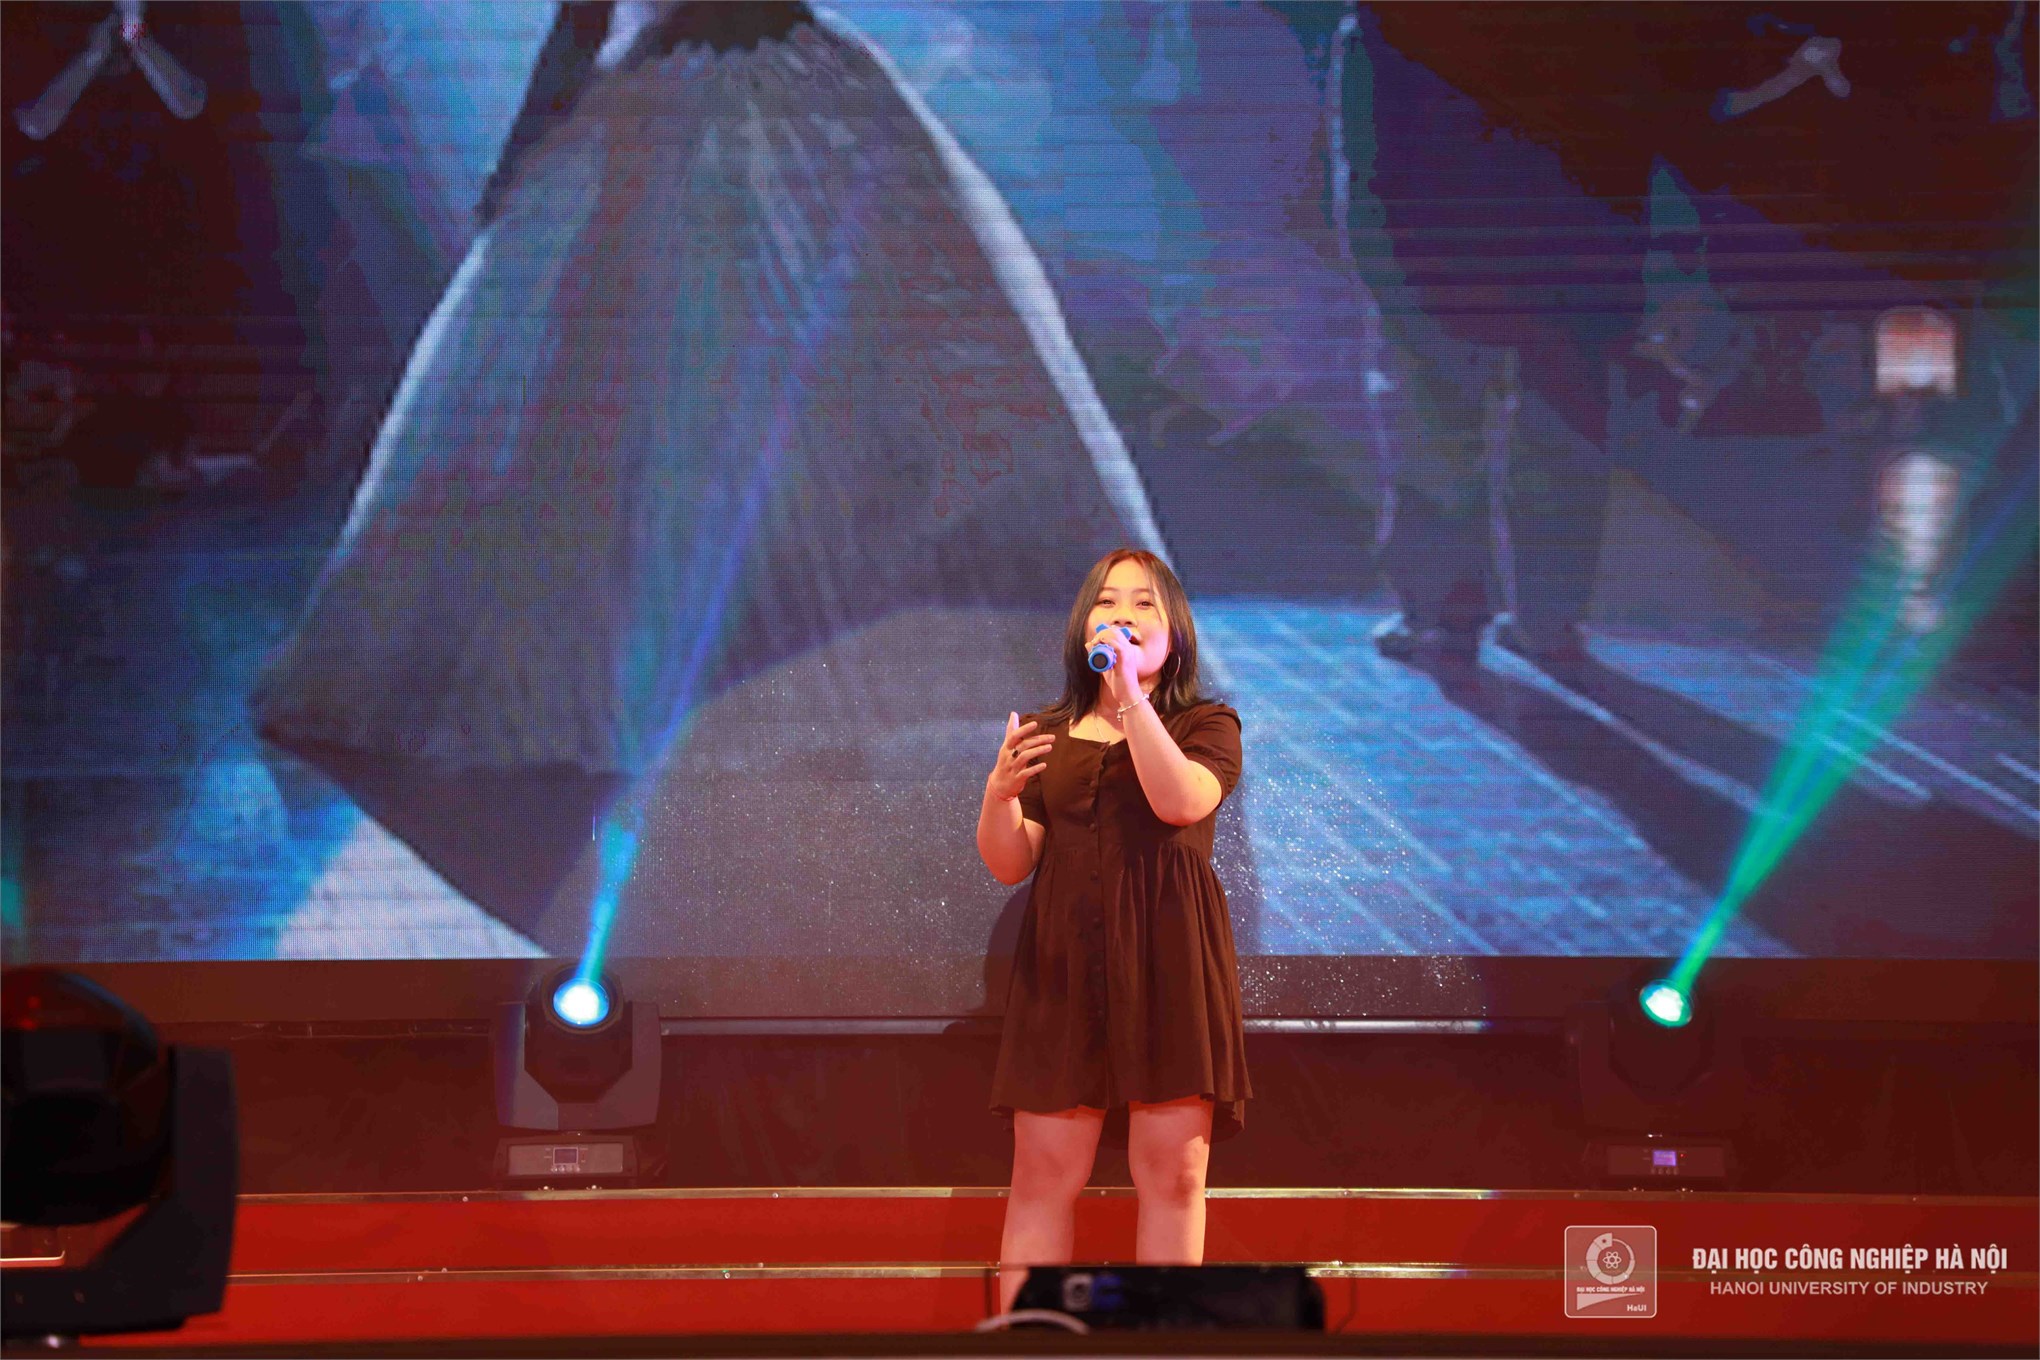 Impressions from the 2021 HaUI Student Singing Contest final night